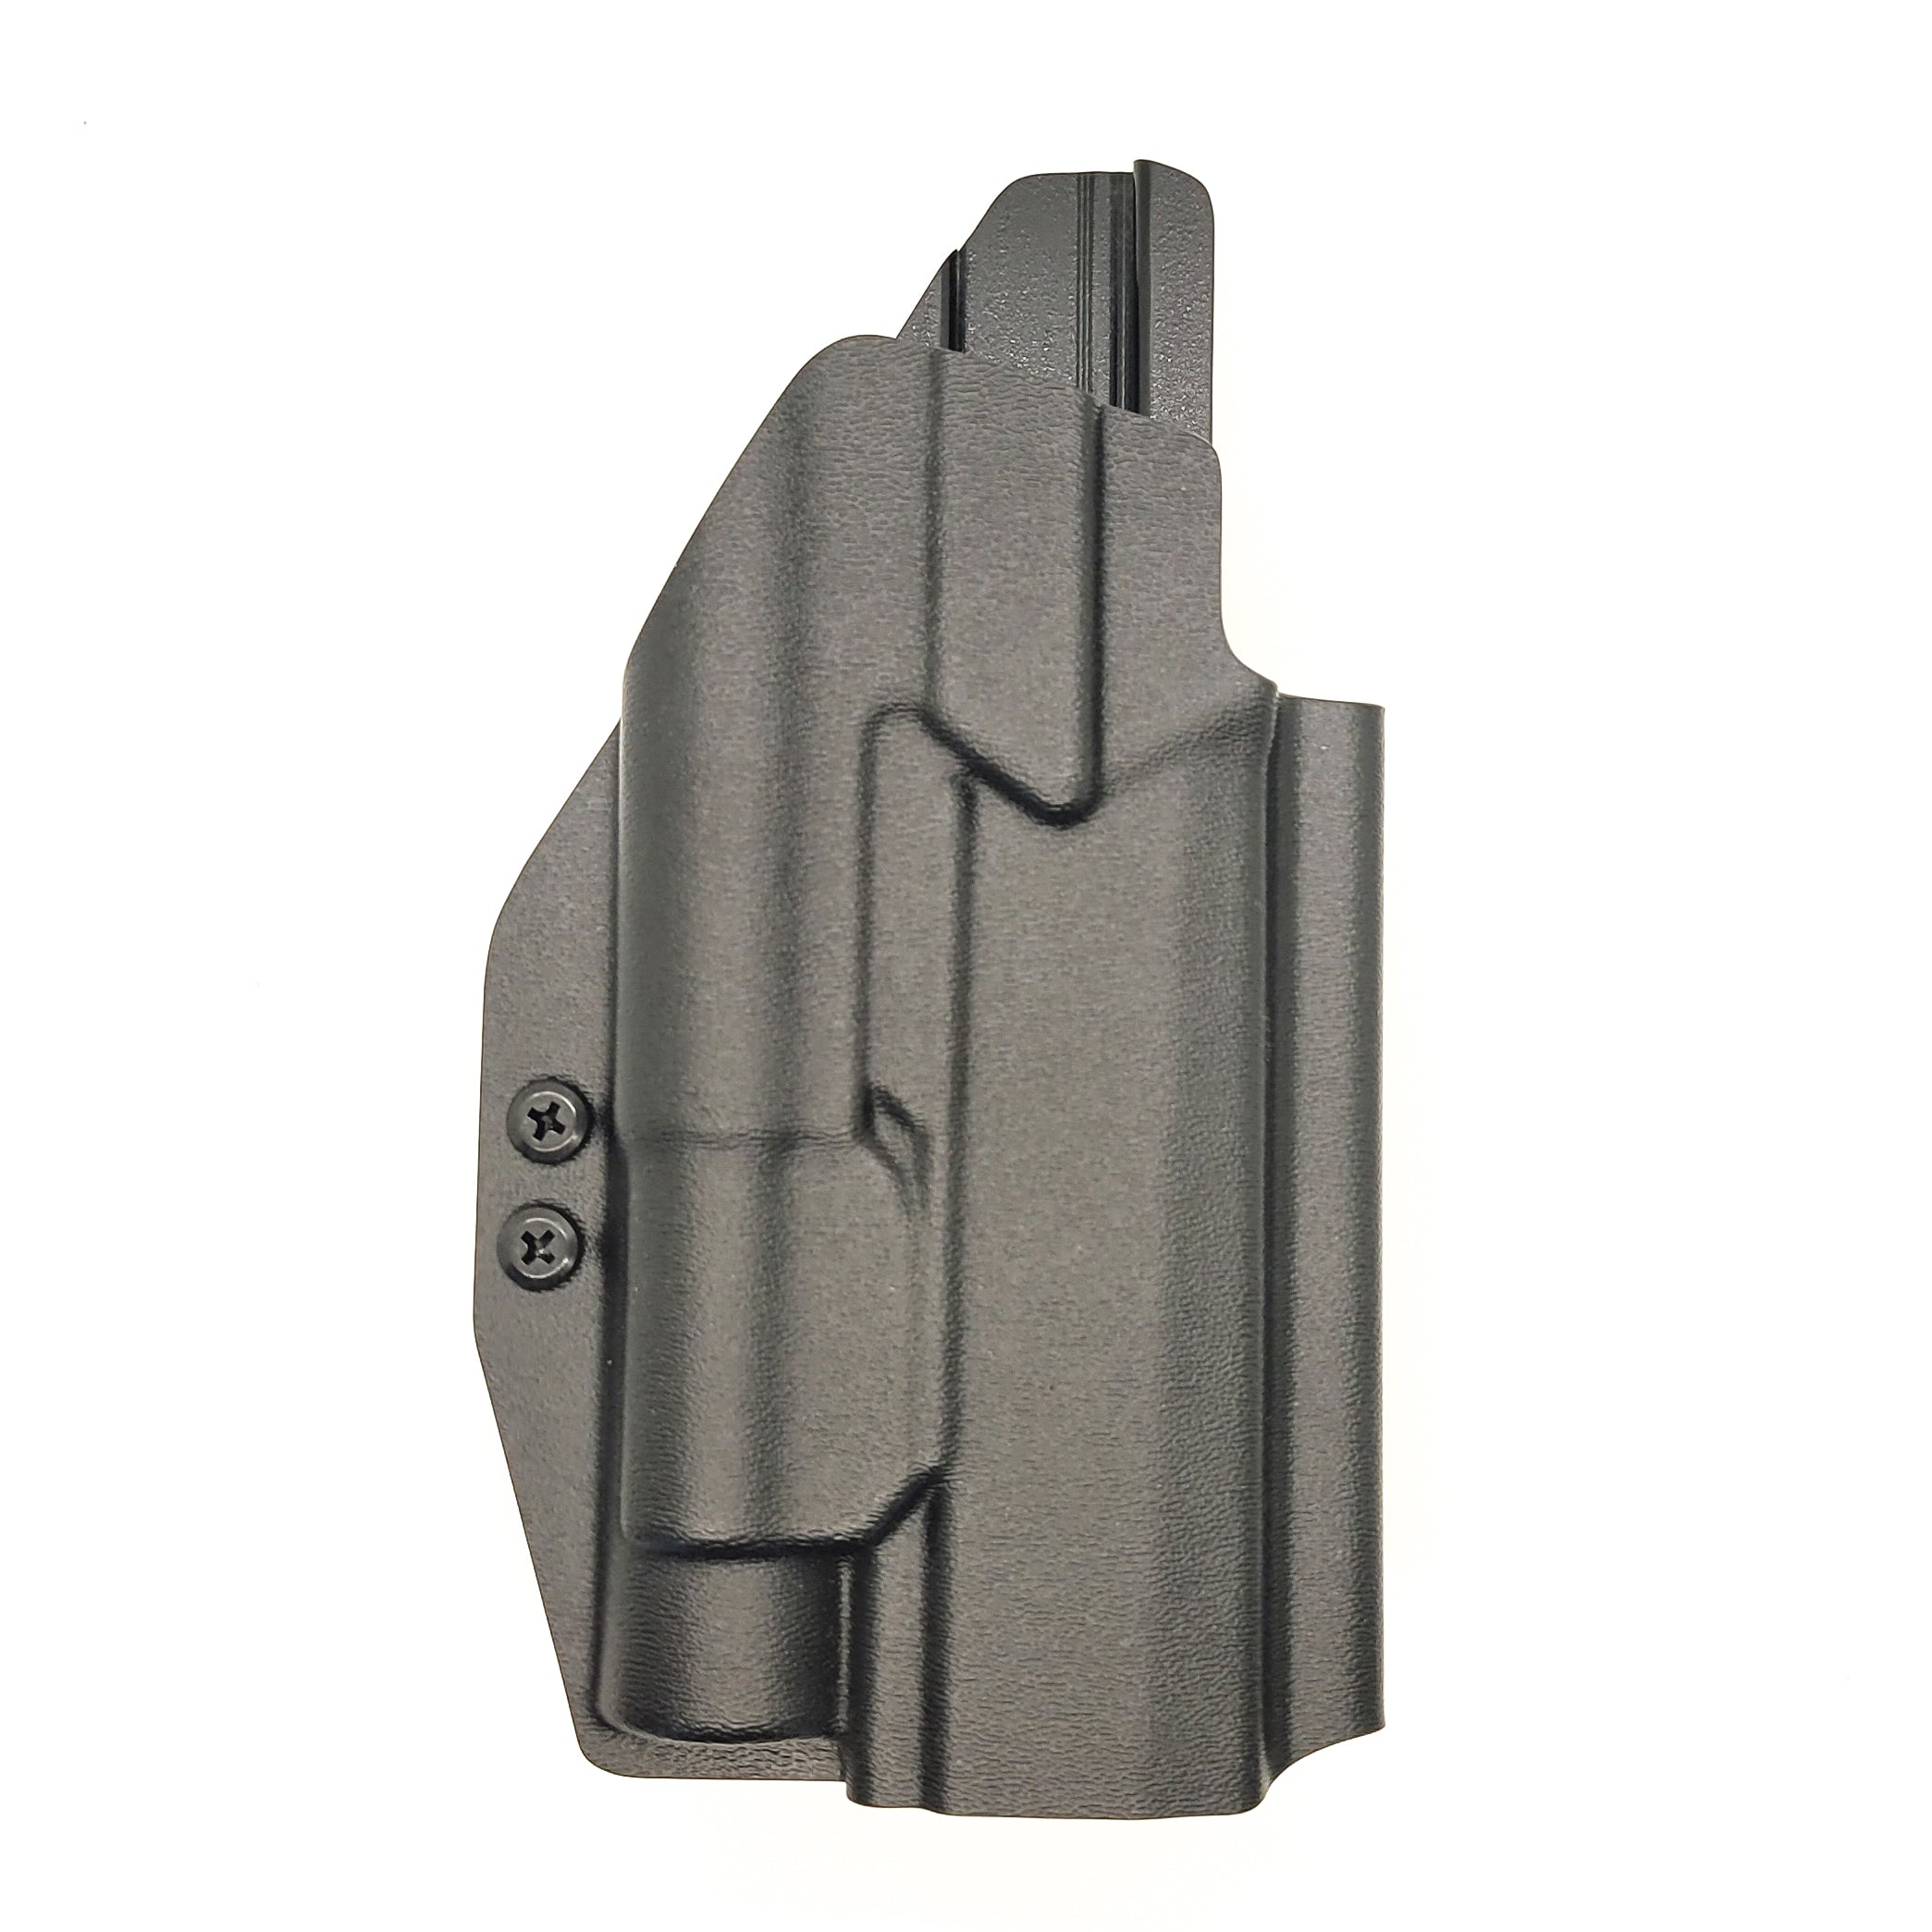 Outside Waistband Kydex Holster designed to fit the Full Size and Carry P320 series with Streamlight TLR-1 and TLR-1HL weapon mounted light and Align Tactical Thumb Rest Takedown Lever. The holster will accommodate the M17, M18, Carry, Compact, & X-Five models. Adjustable Retention, Made in USA. P 320 TLR1 TLR 1